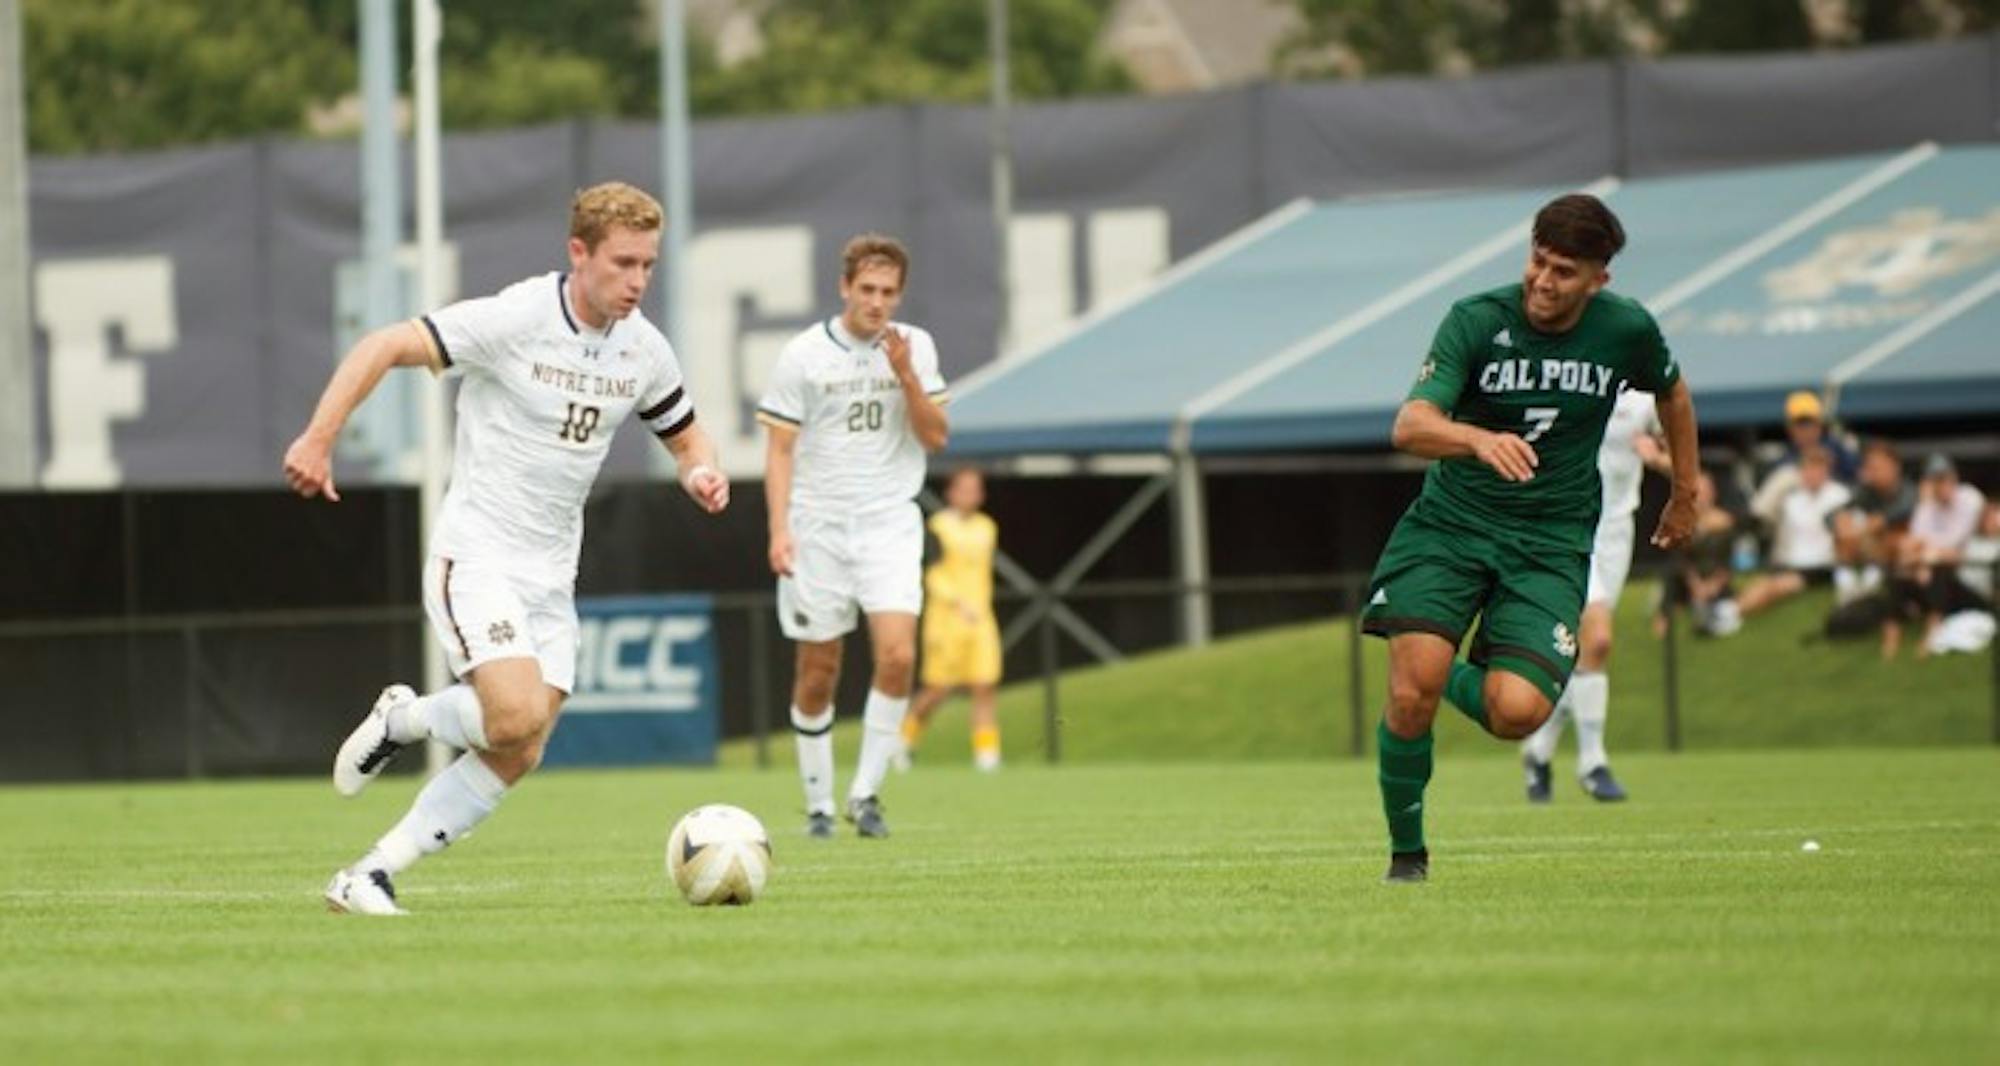 Irish senior forward Jon Gallagher dribbles the ball across the pitch during Notre Dame’s 2-1 win over Cal Poly in double overtime on Aug. 27 at Alumni Stadium. Gallagher scored his first career hat trick during Notre Dame’s 3-1 win over Boston College on Friday, scoring all three goals for the Irish and earning his first goals of the season.